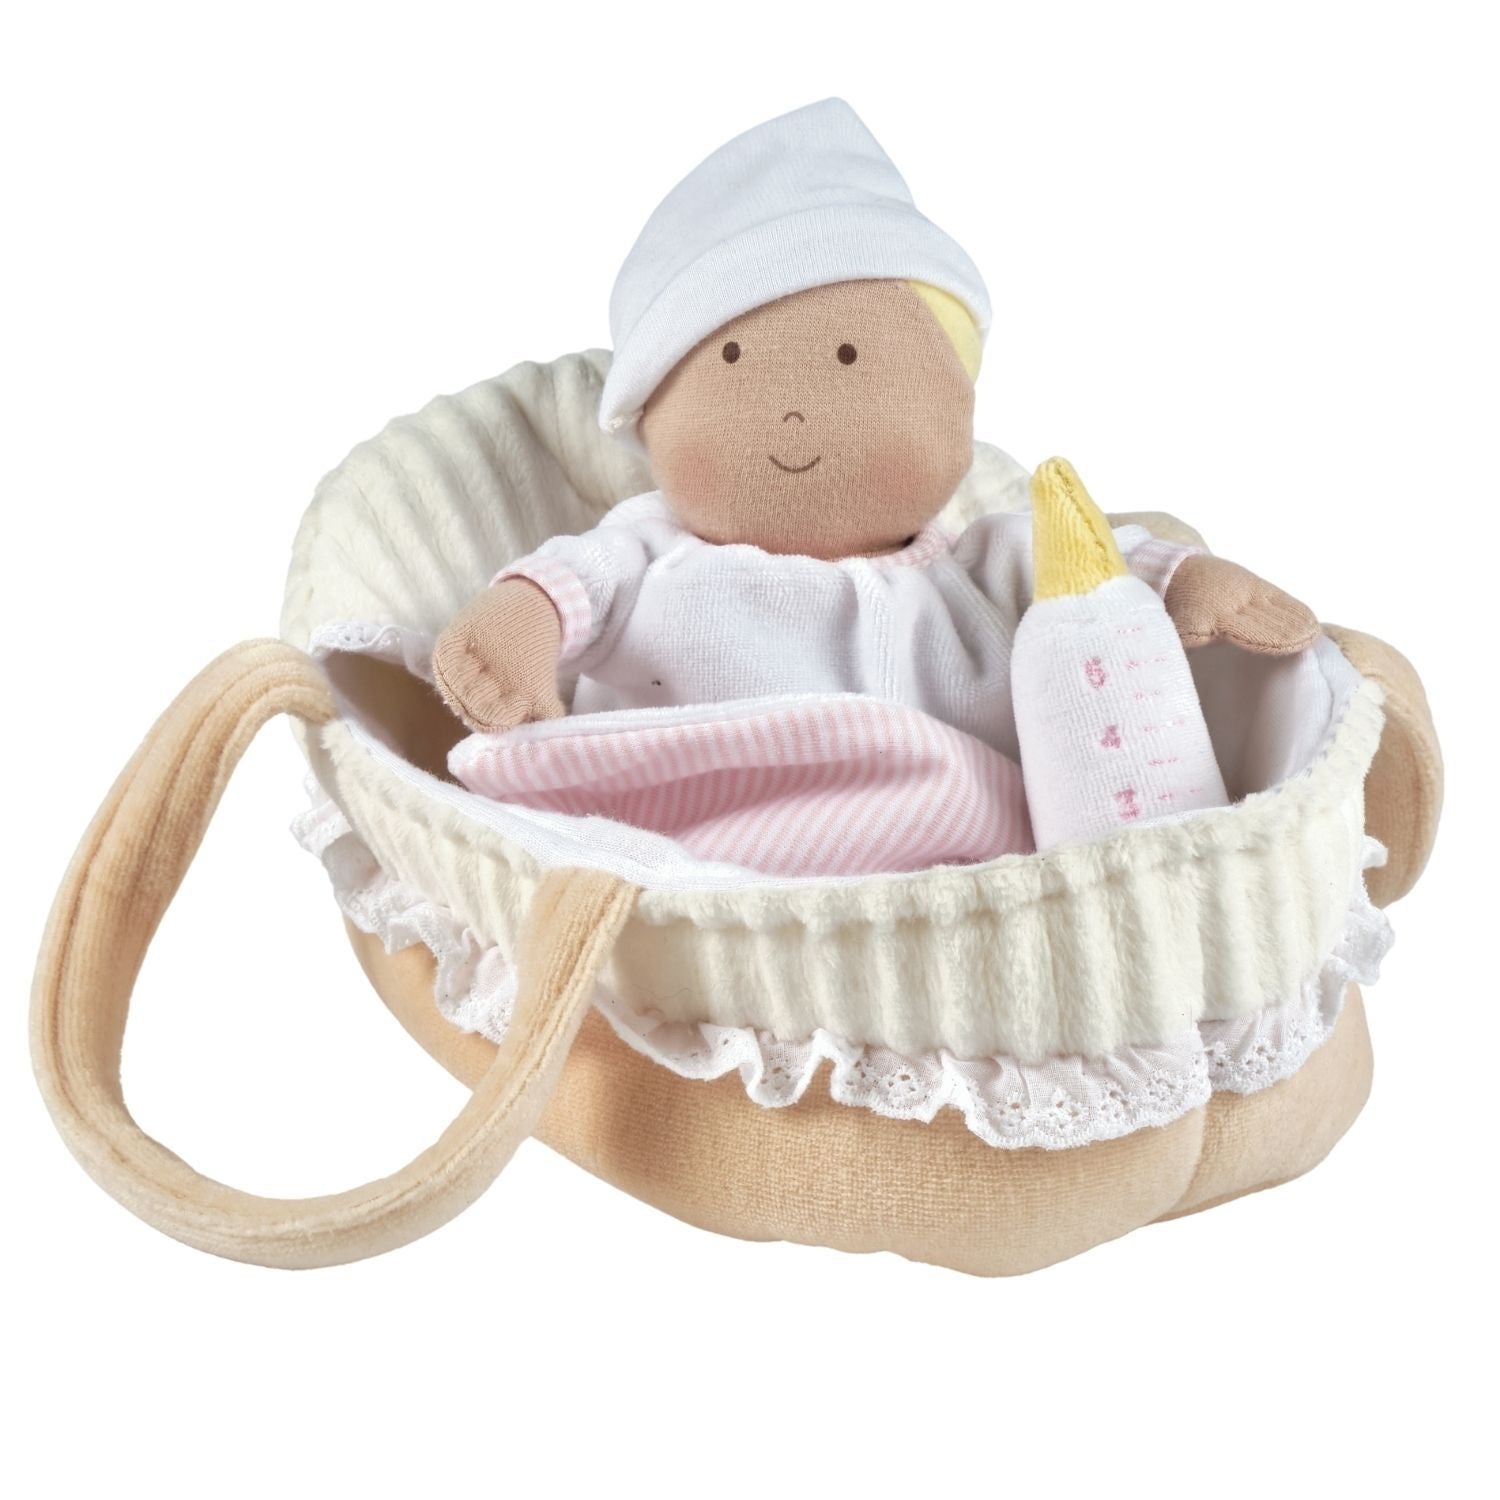 Grace Baby Soft Doll with Carrycot, Bottle & Blanket - Twinkle Twinkle Little One